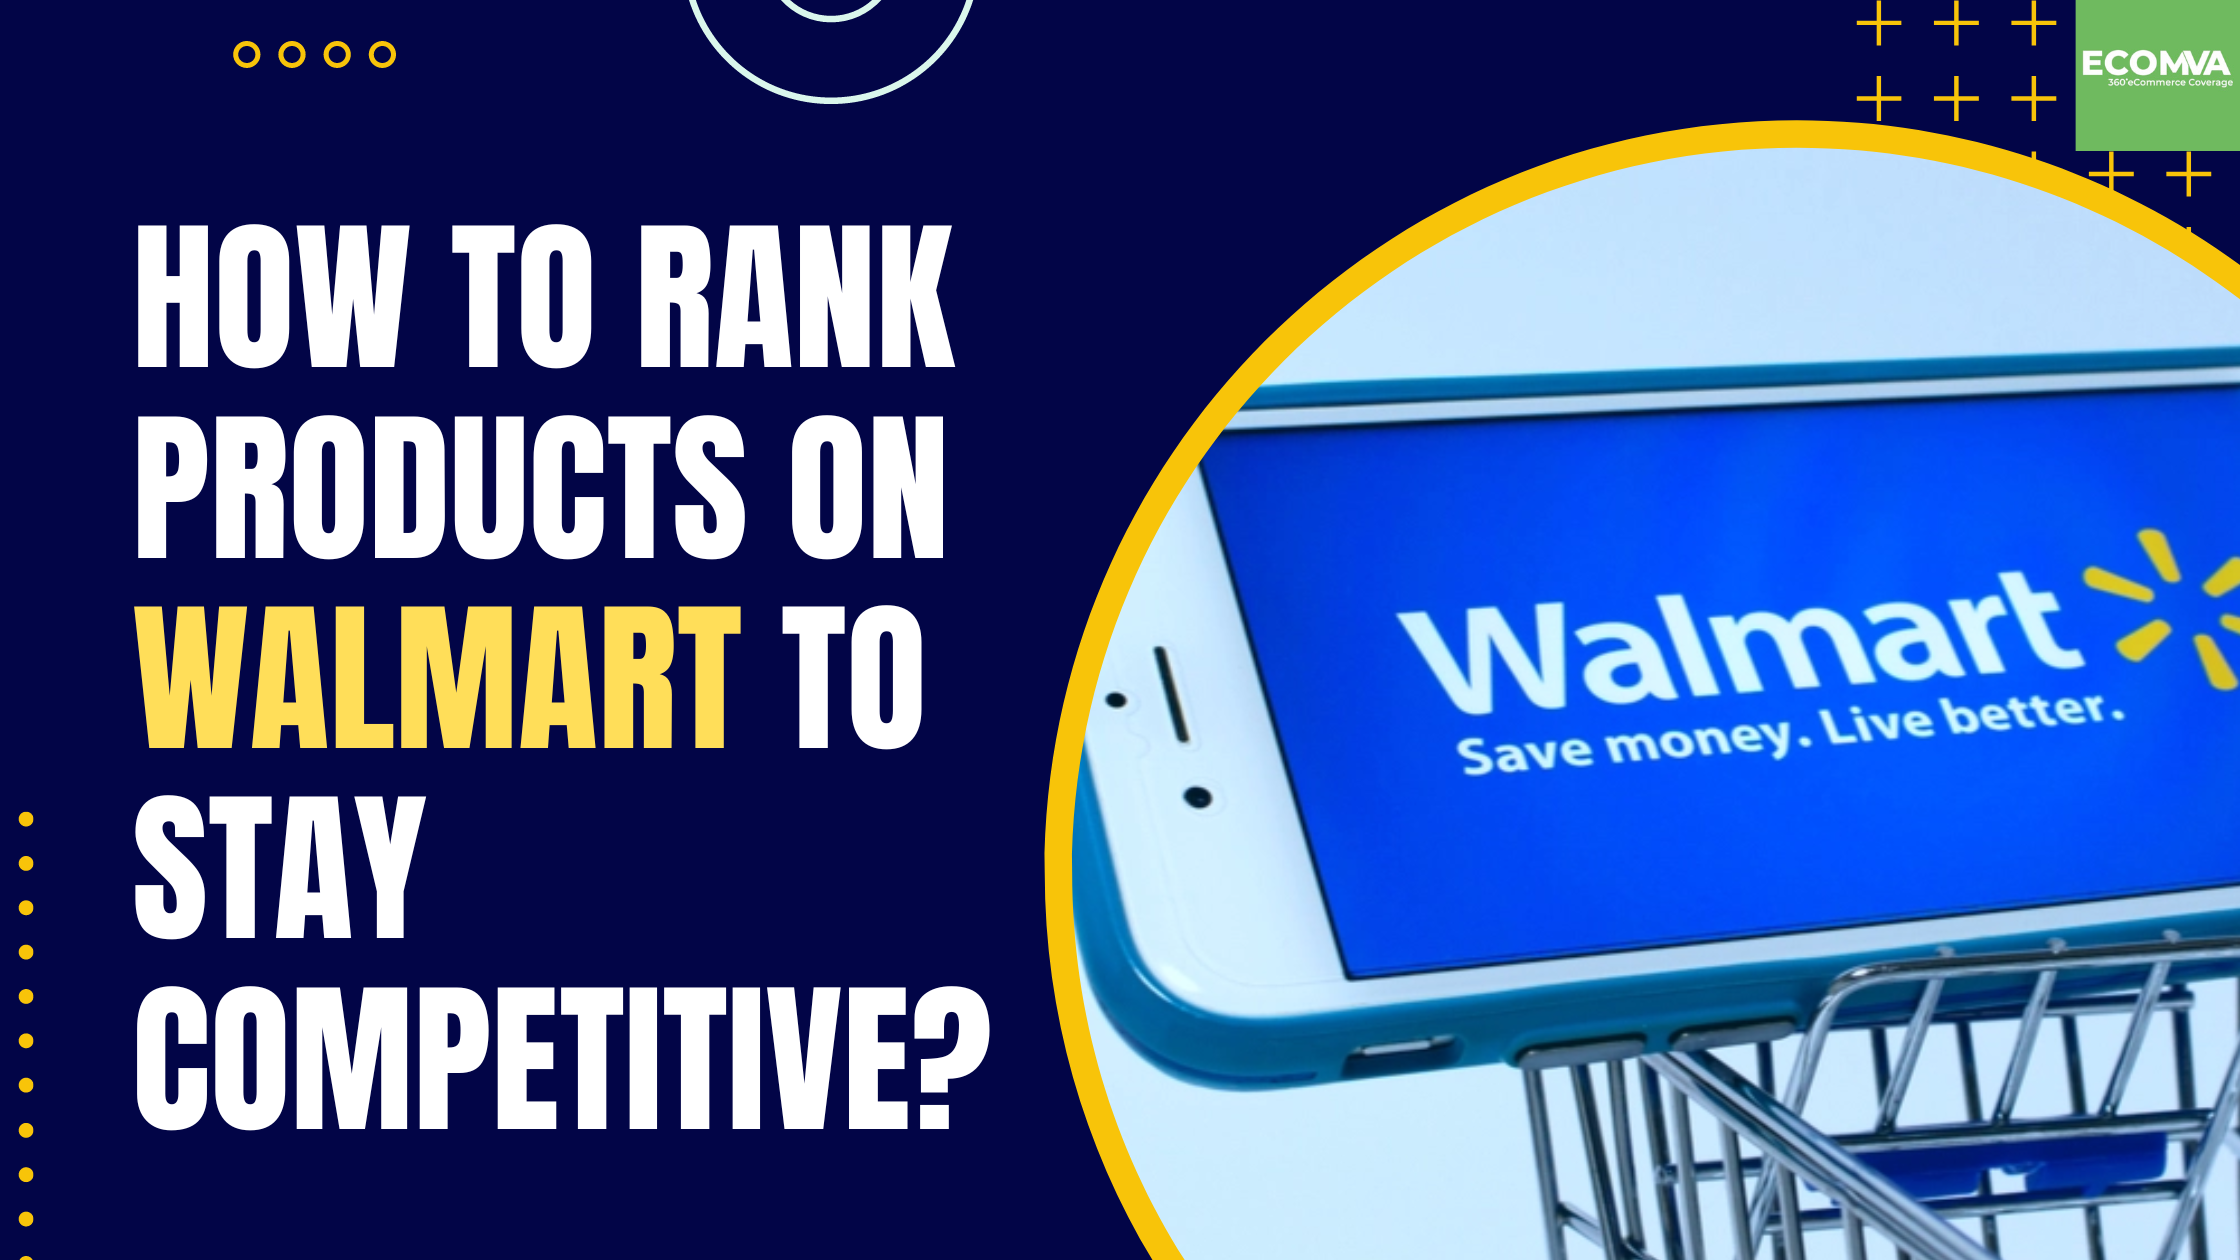 How To Rank Products On Walmart To Stay Competitive?